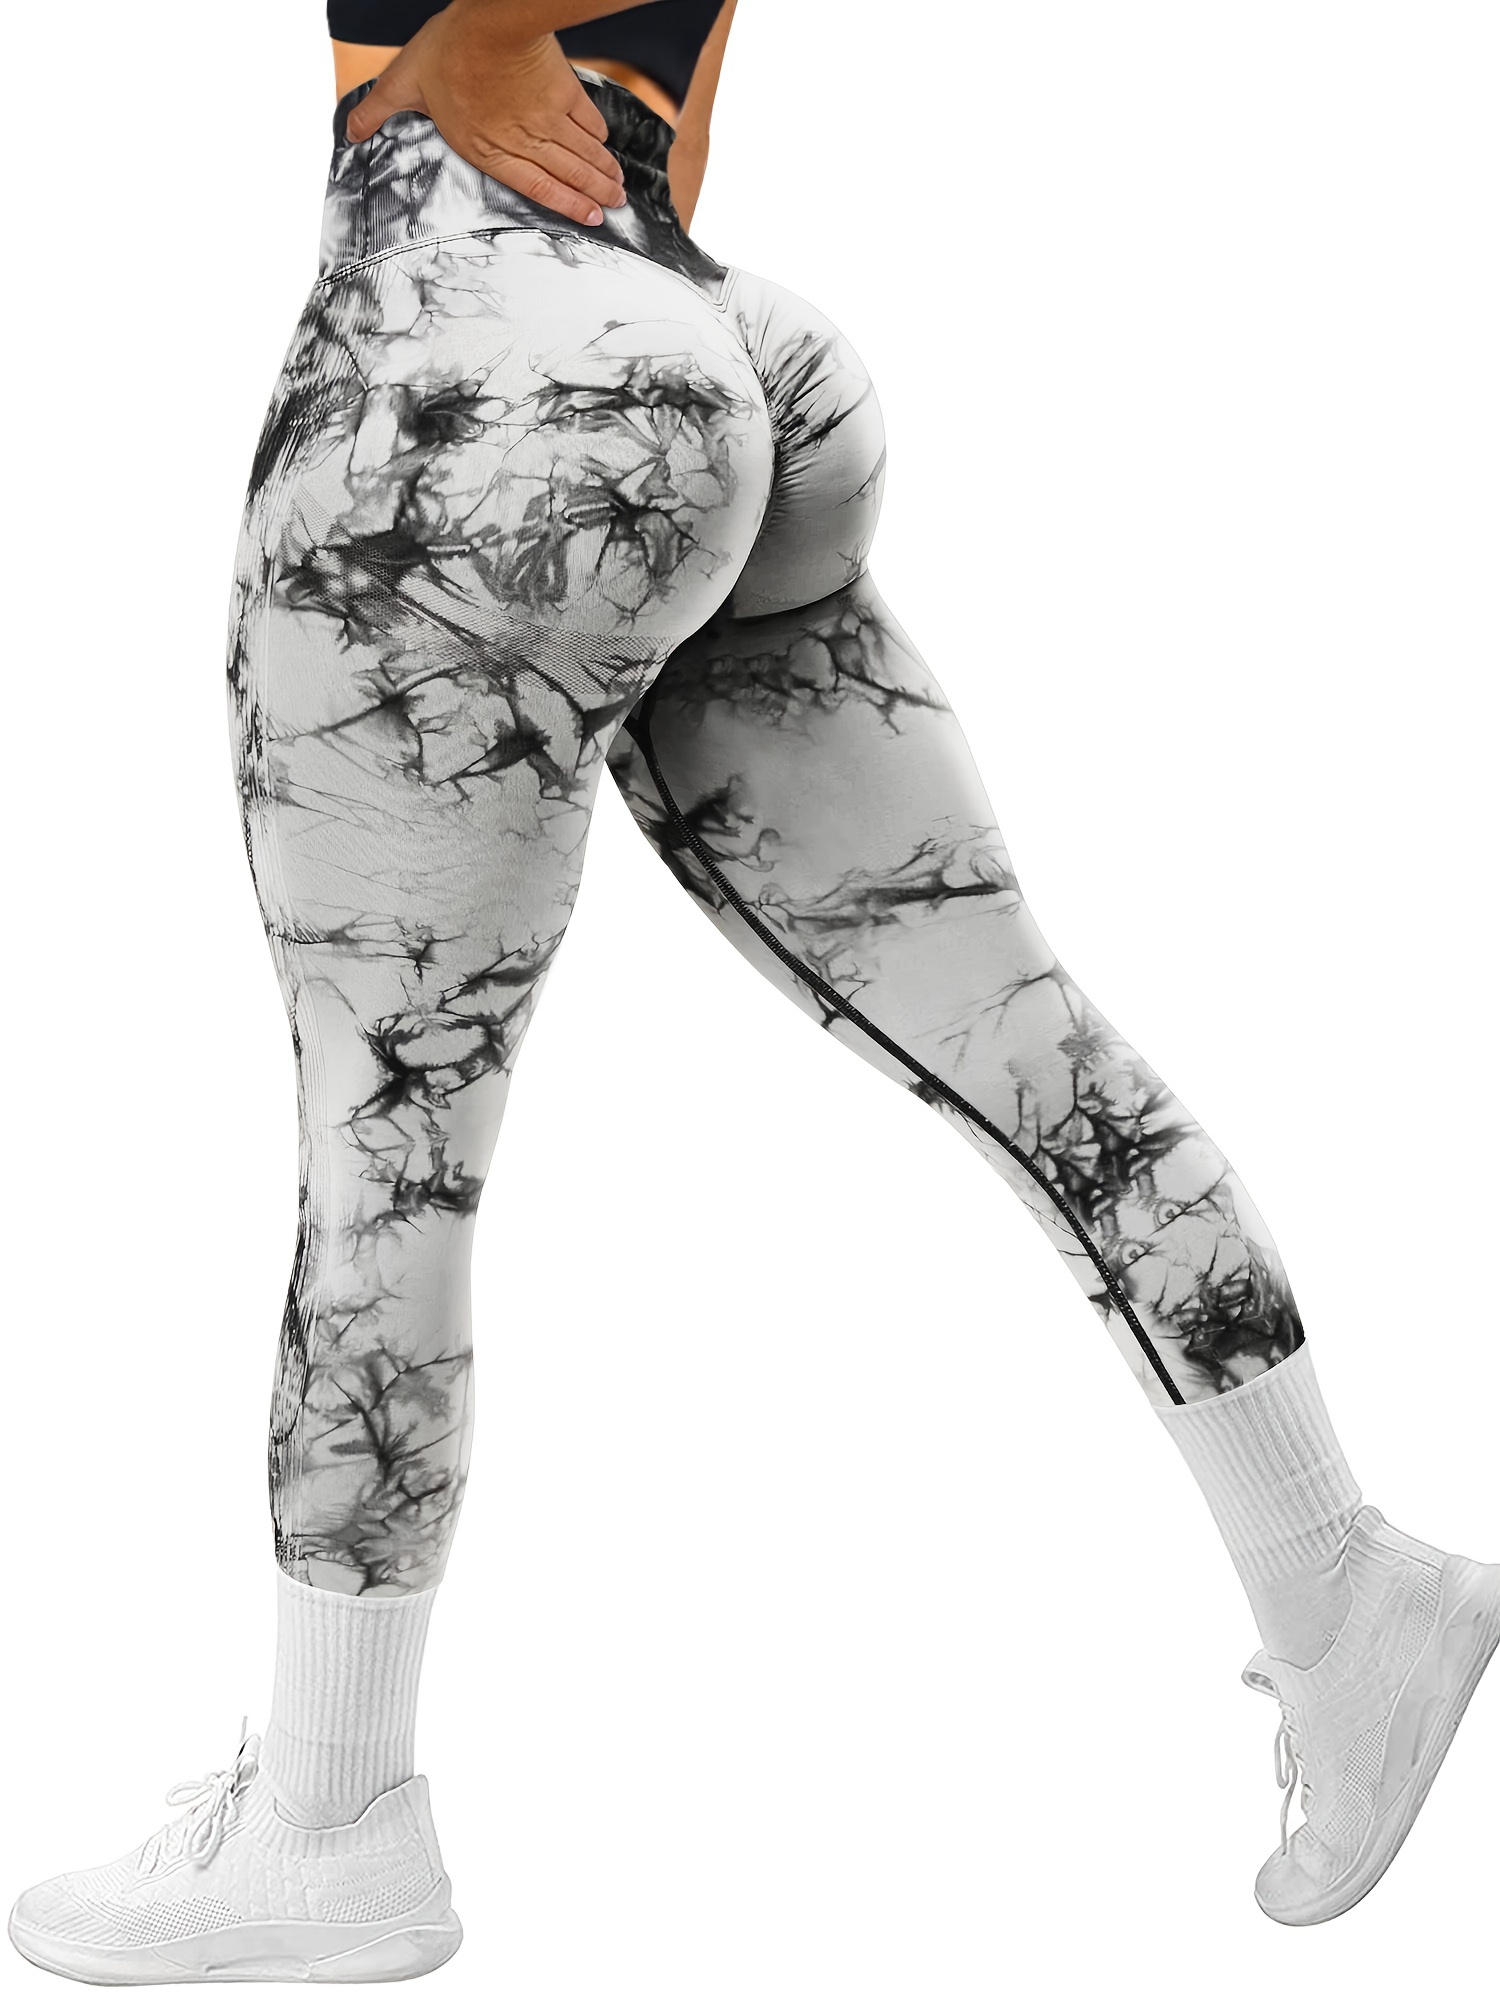 Aayomet Yoga Pants Women Women's Tight Peach Lifting Tie Dyed High Waisted  Seamless Tie Dye Yoga Fitness Trousers,AG L